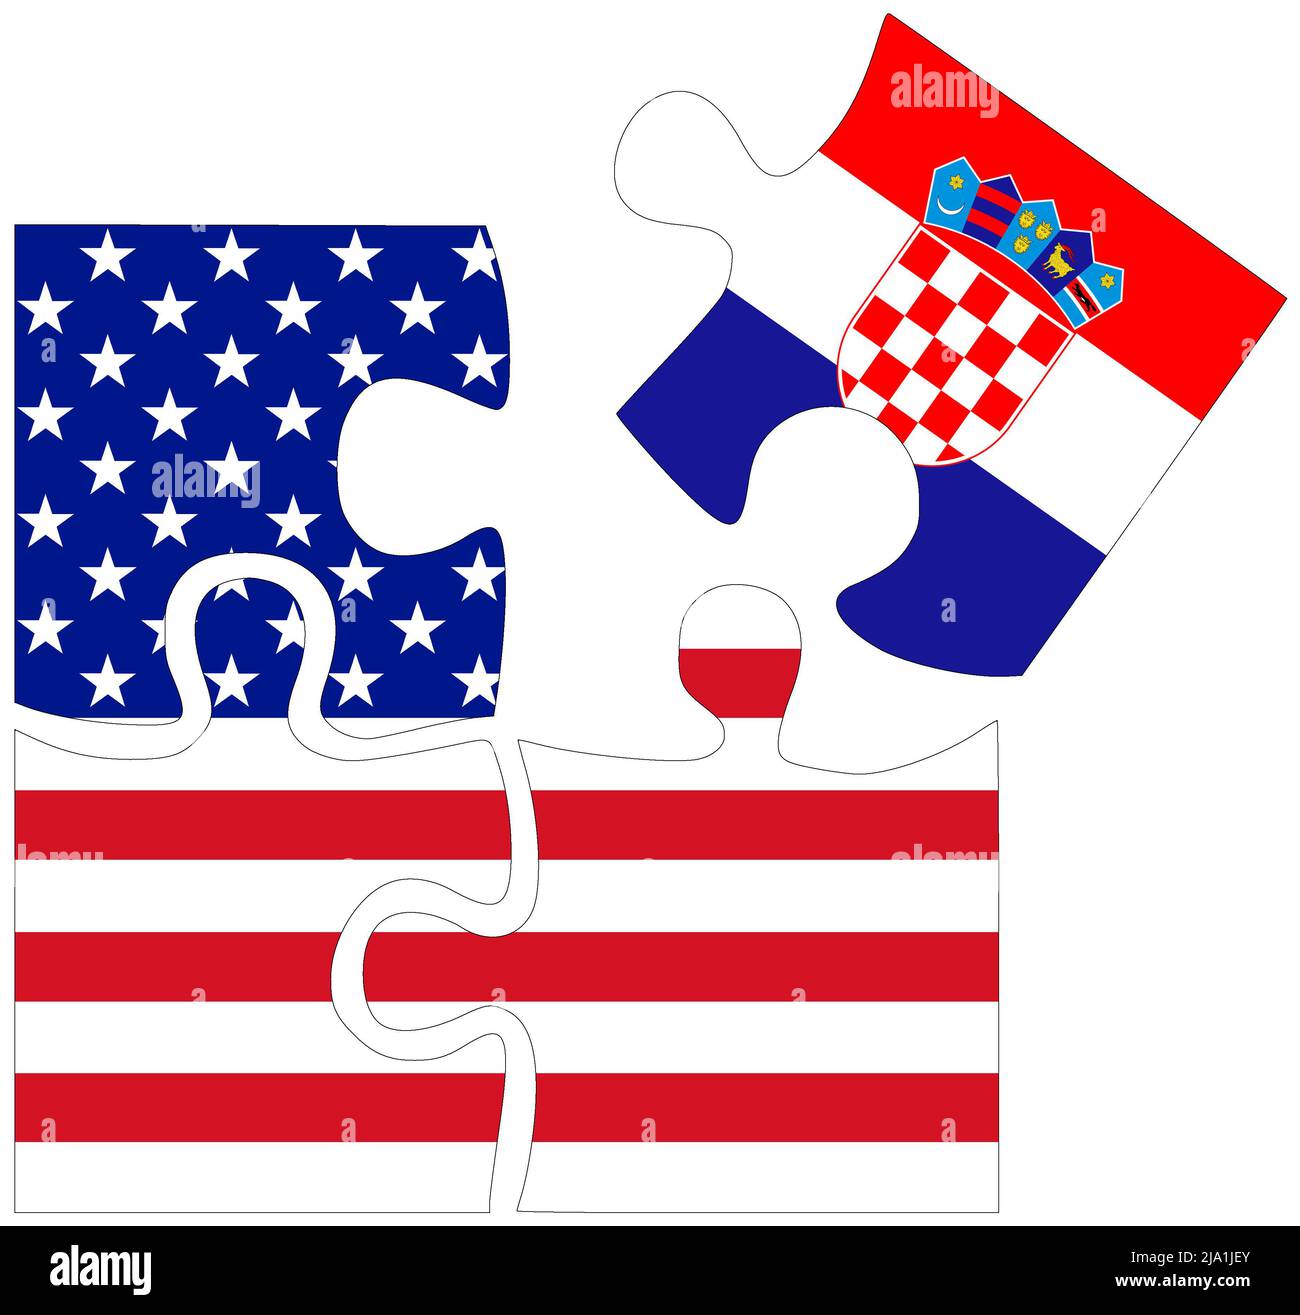 USA - Croatia : puzzle shapes with flags, symbol of agreement or friendship Stock Photo